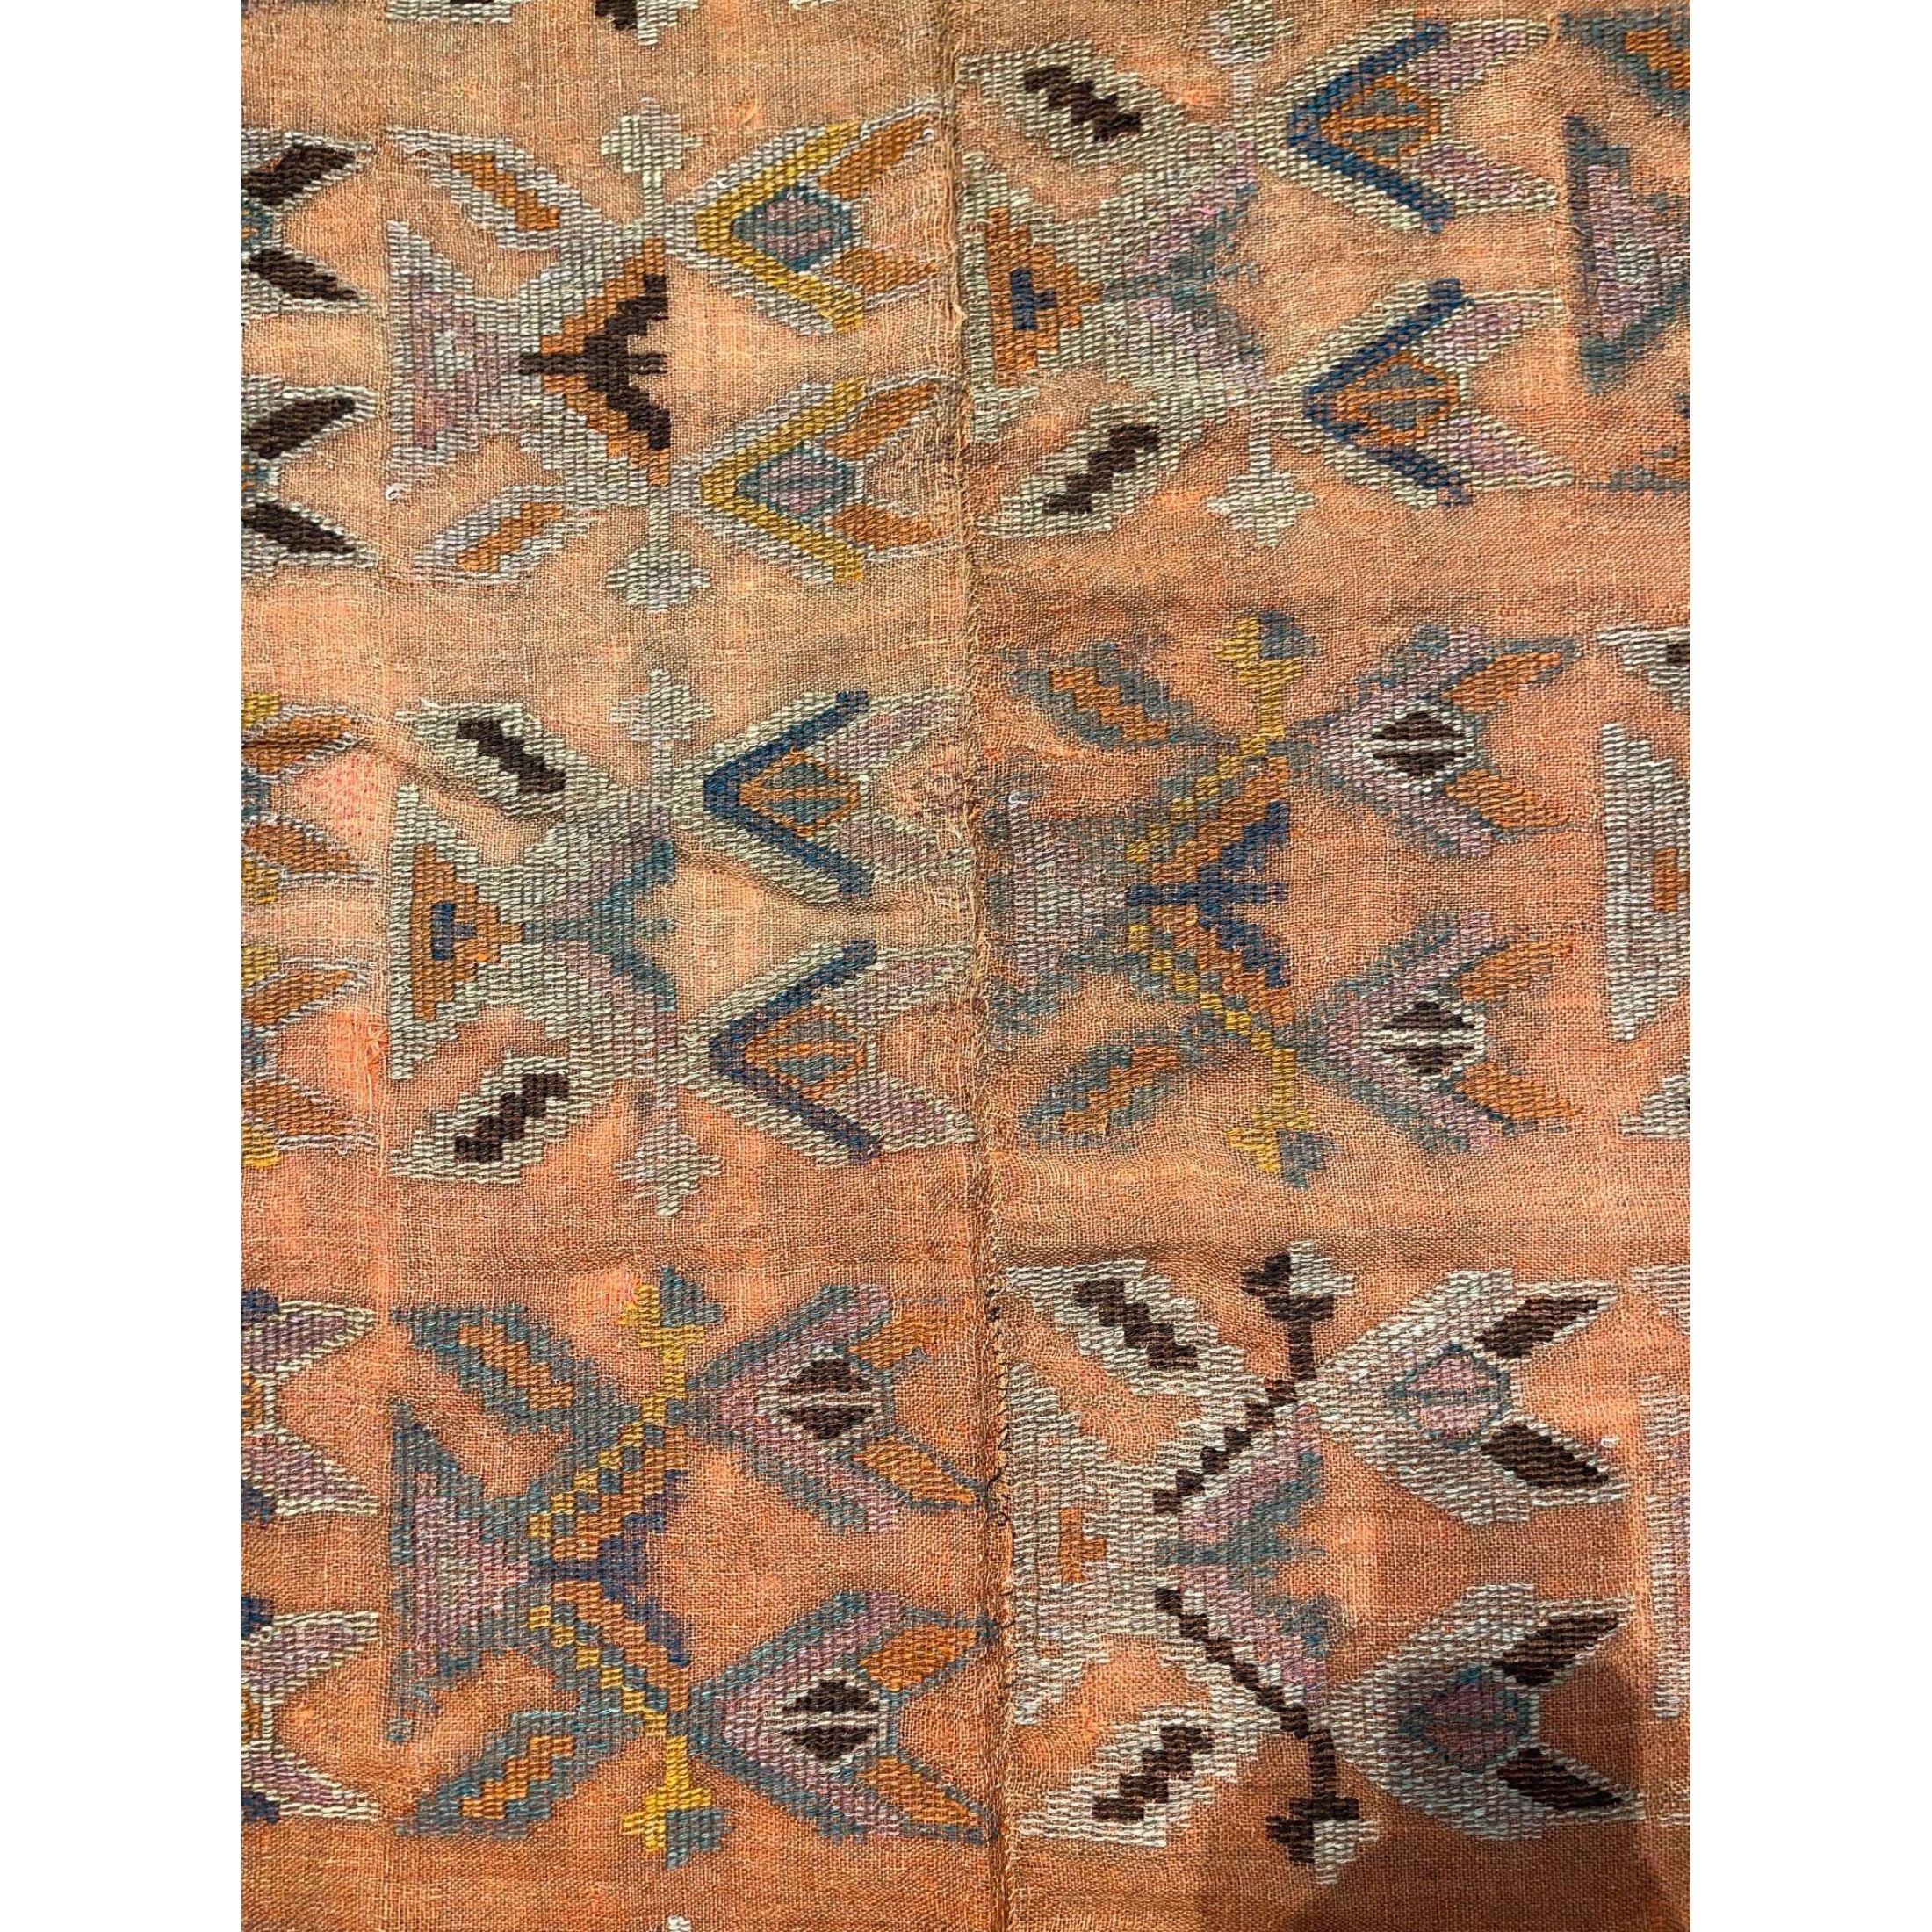 verné rug, verné also spelled verni or verneh, handmade Caucasian floor covering that was formerly termed a sileh. It is usually woven in two pieces joined at the middle, with a design composed of squarish compartments, usually in horizonal rows of